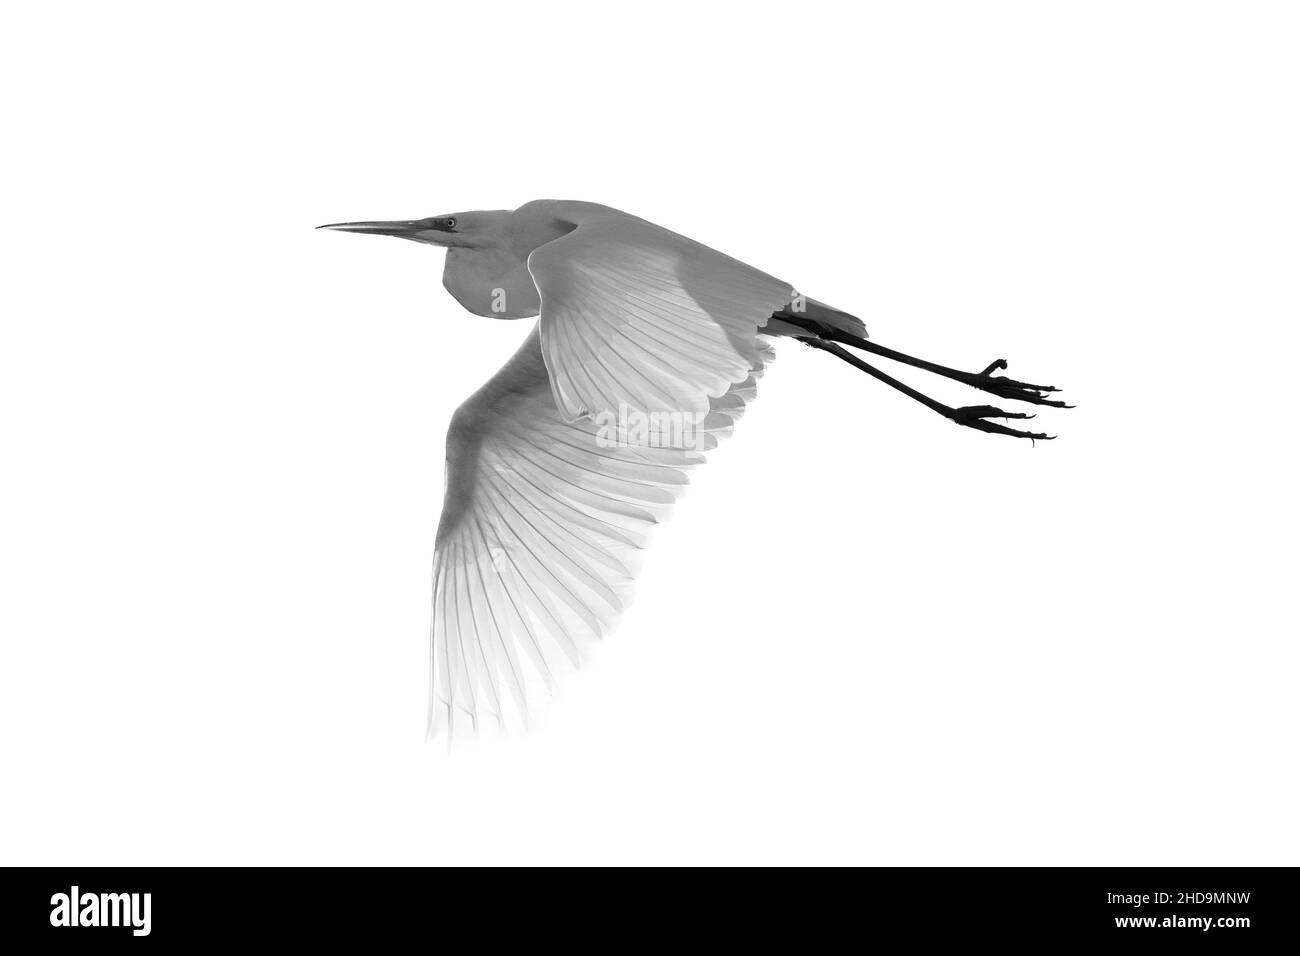 Grayscale shot of a grey heron (Ardea cinerea) in flight isolated on a white background Stock Photo